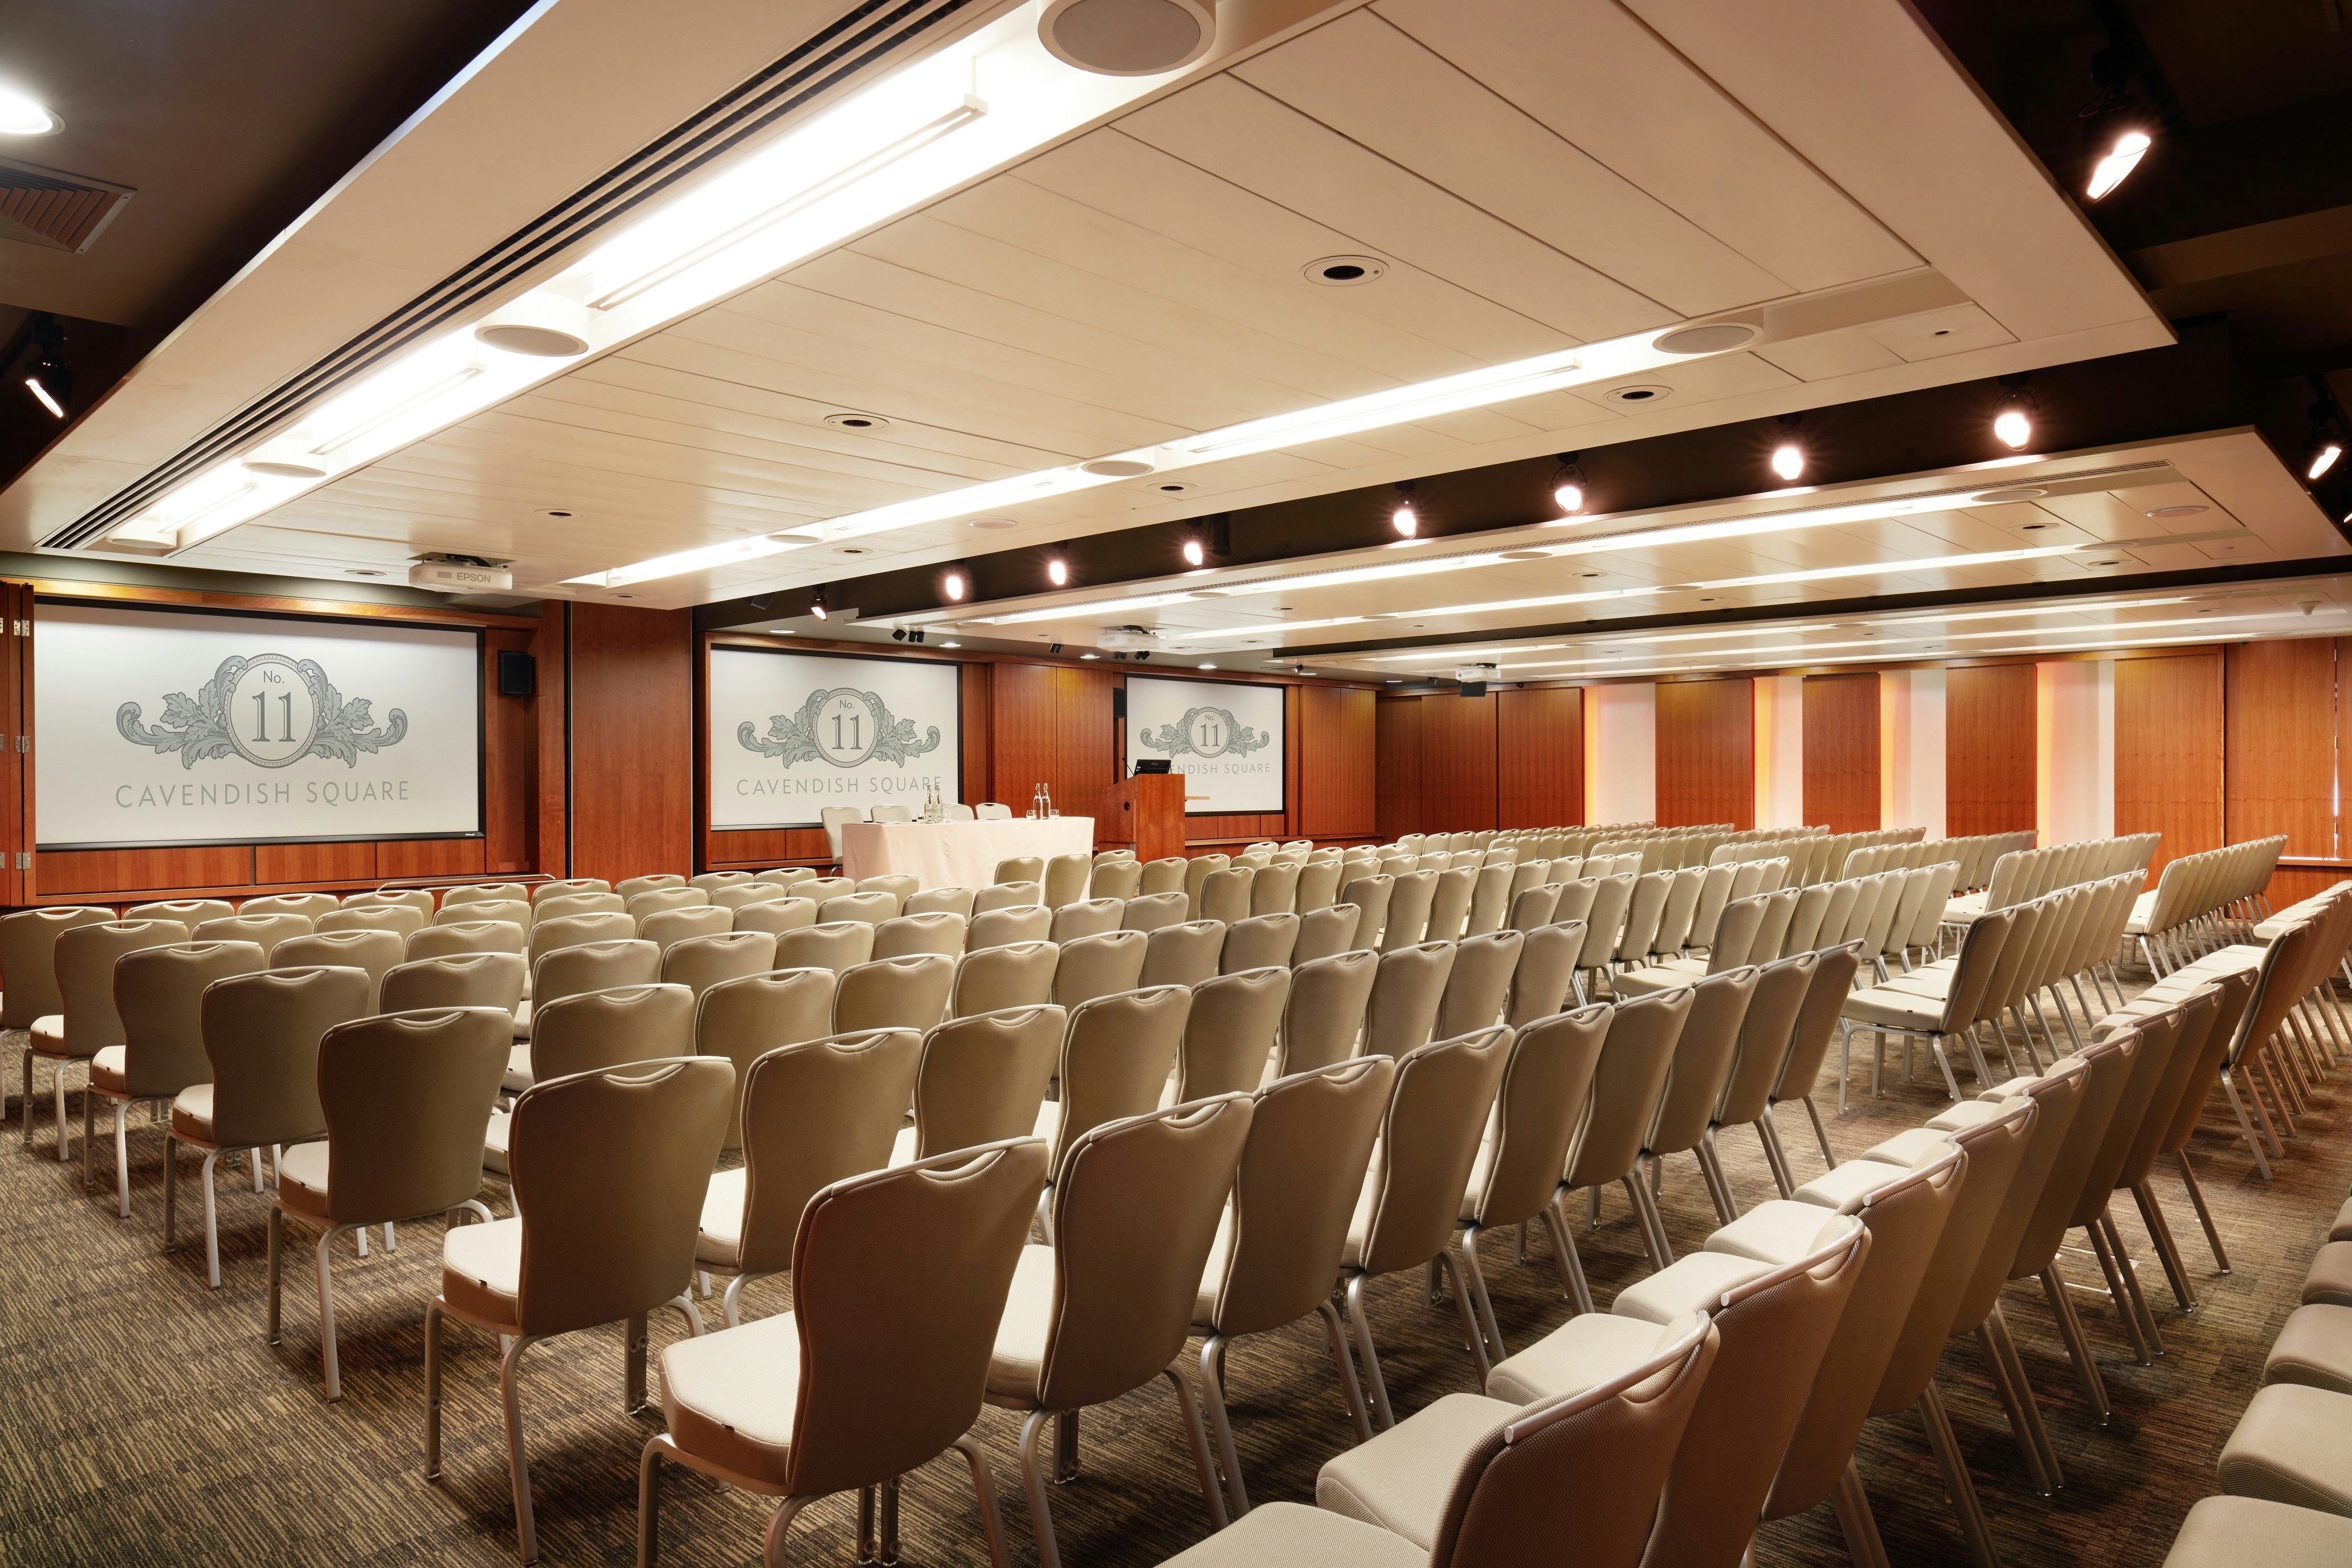 Meeting Rooms Venues in South London - No.11 Cavendish Square